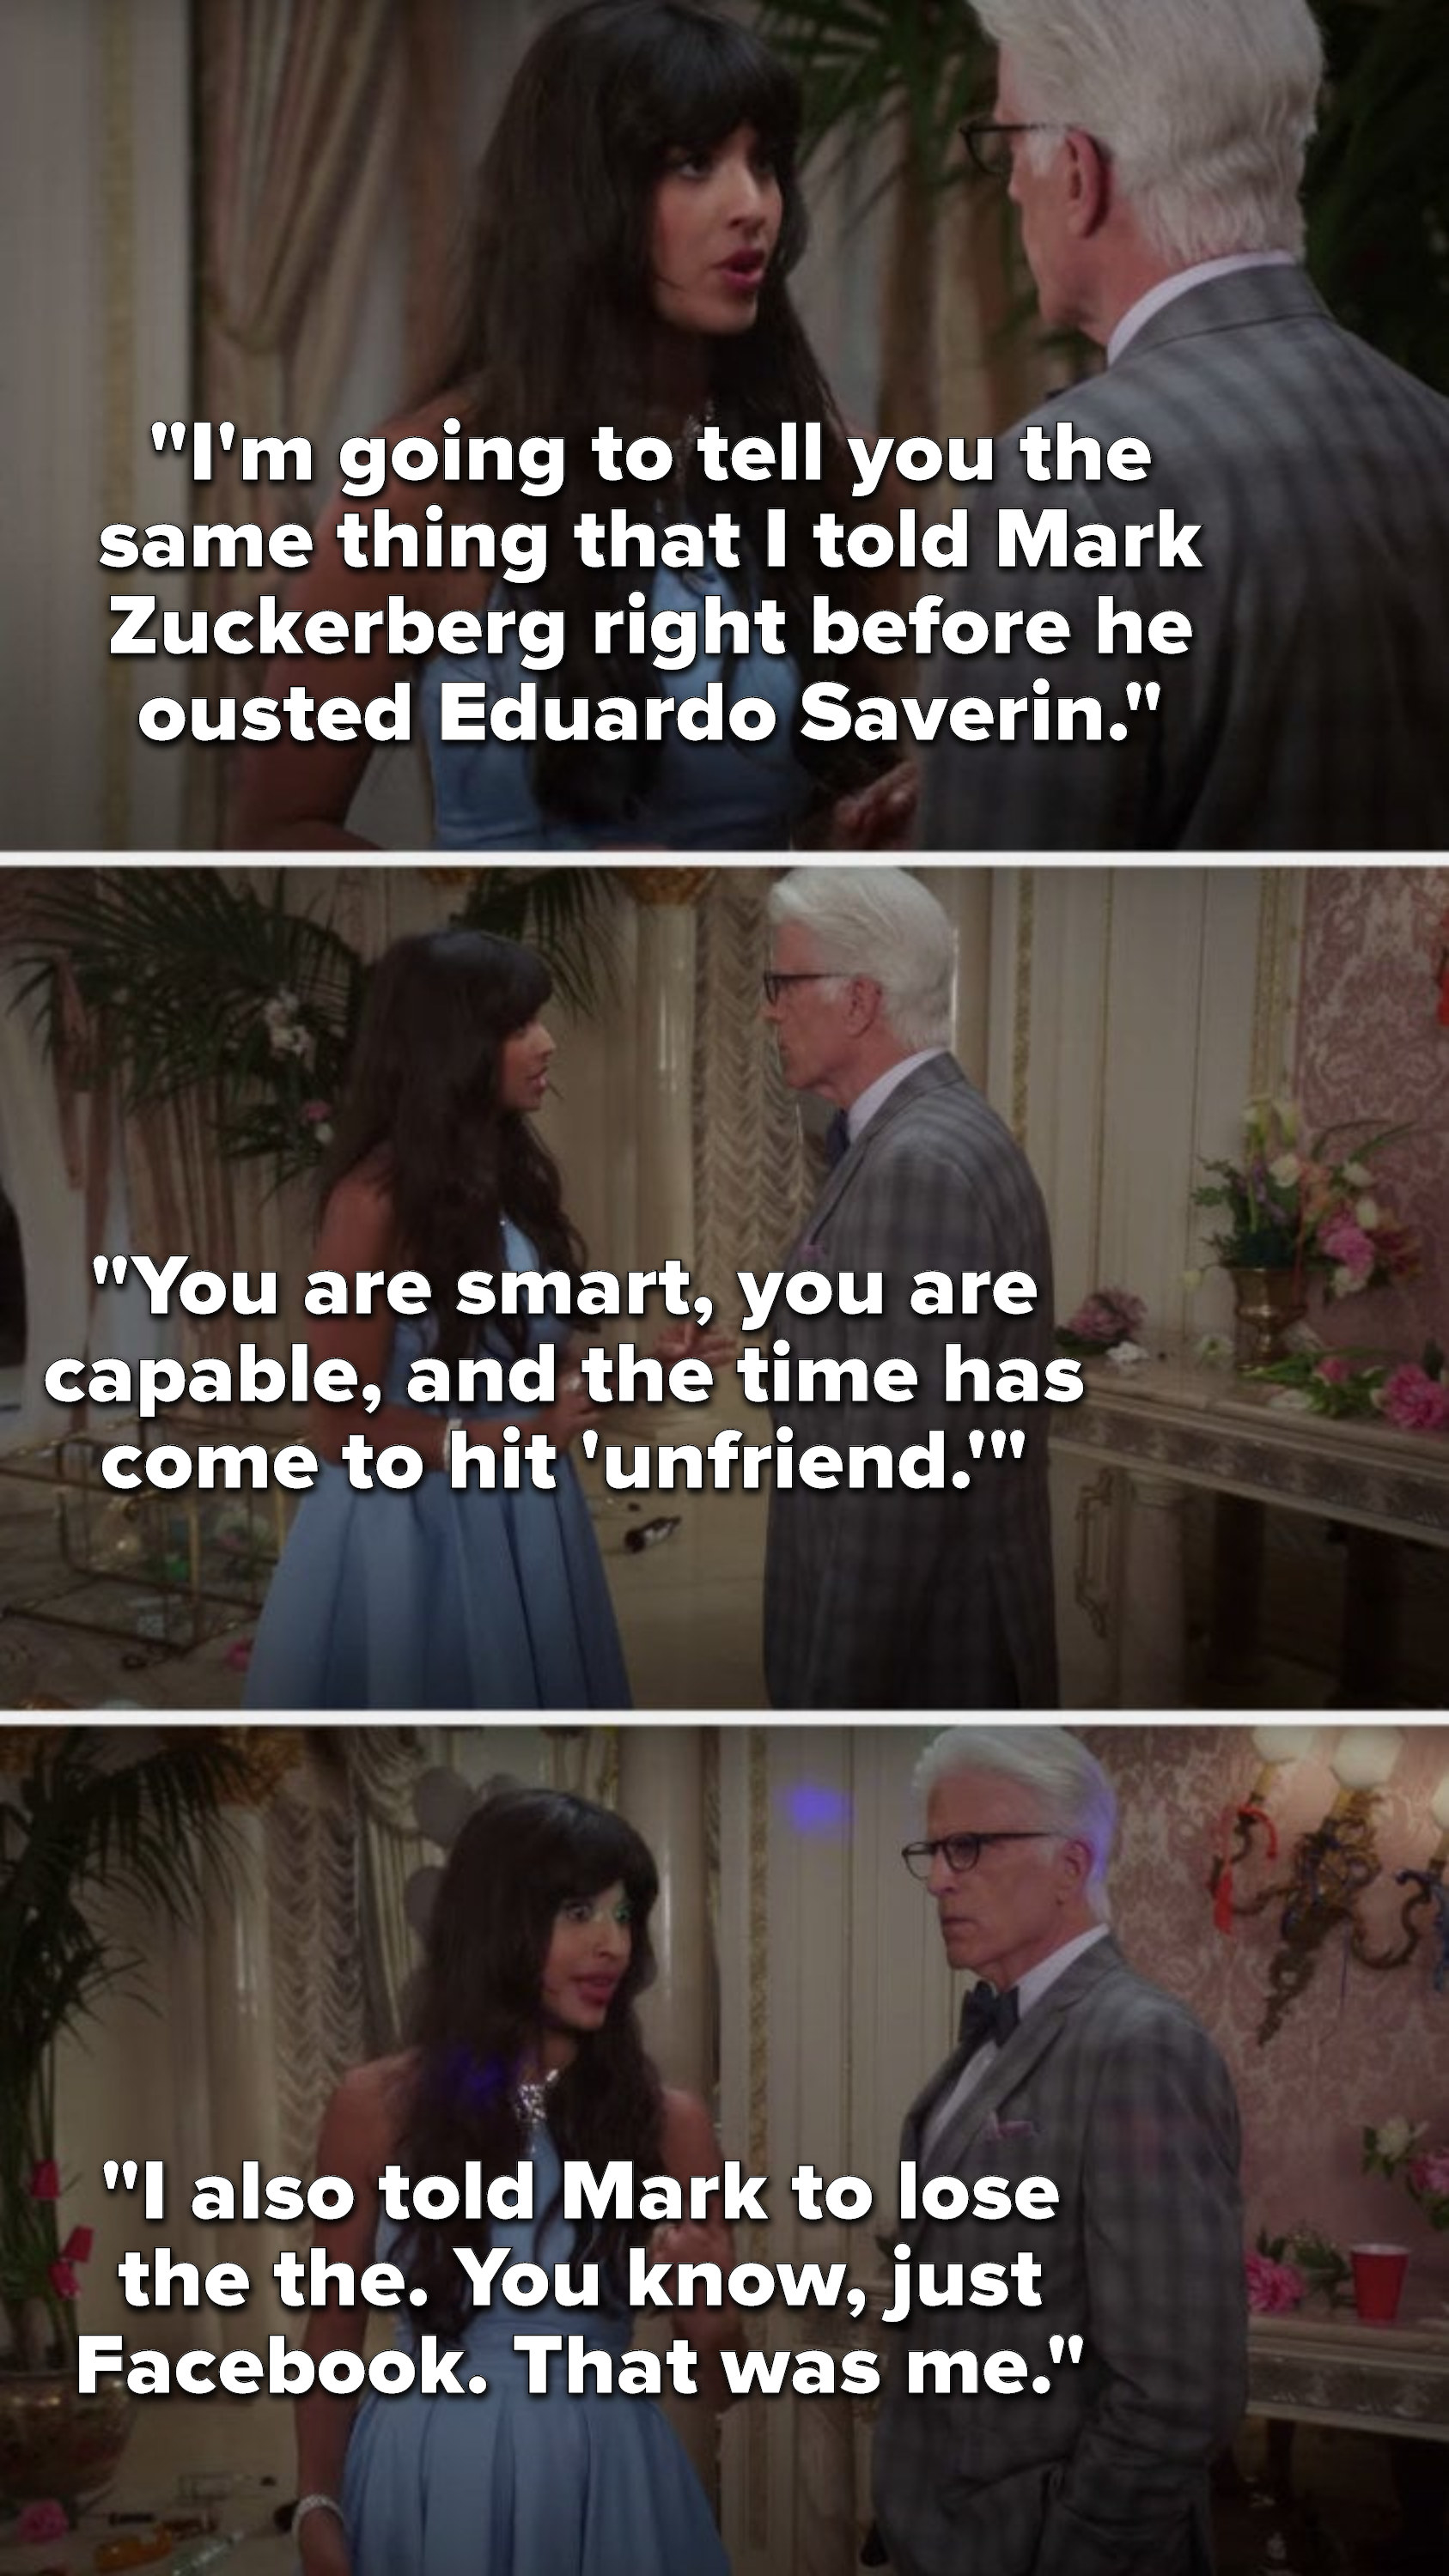 Tahani says, I&#x27;m going to tell you the same thing I told Mark Zuckerberg right before he ousted Eduardo Saverin, you are smart, you are capable, and the time has come to hit unfriend, I also told Mark to lose the the, you know, just Facebook, that was me